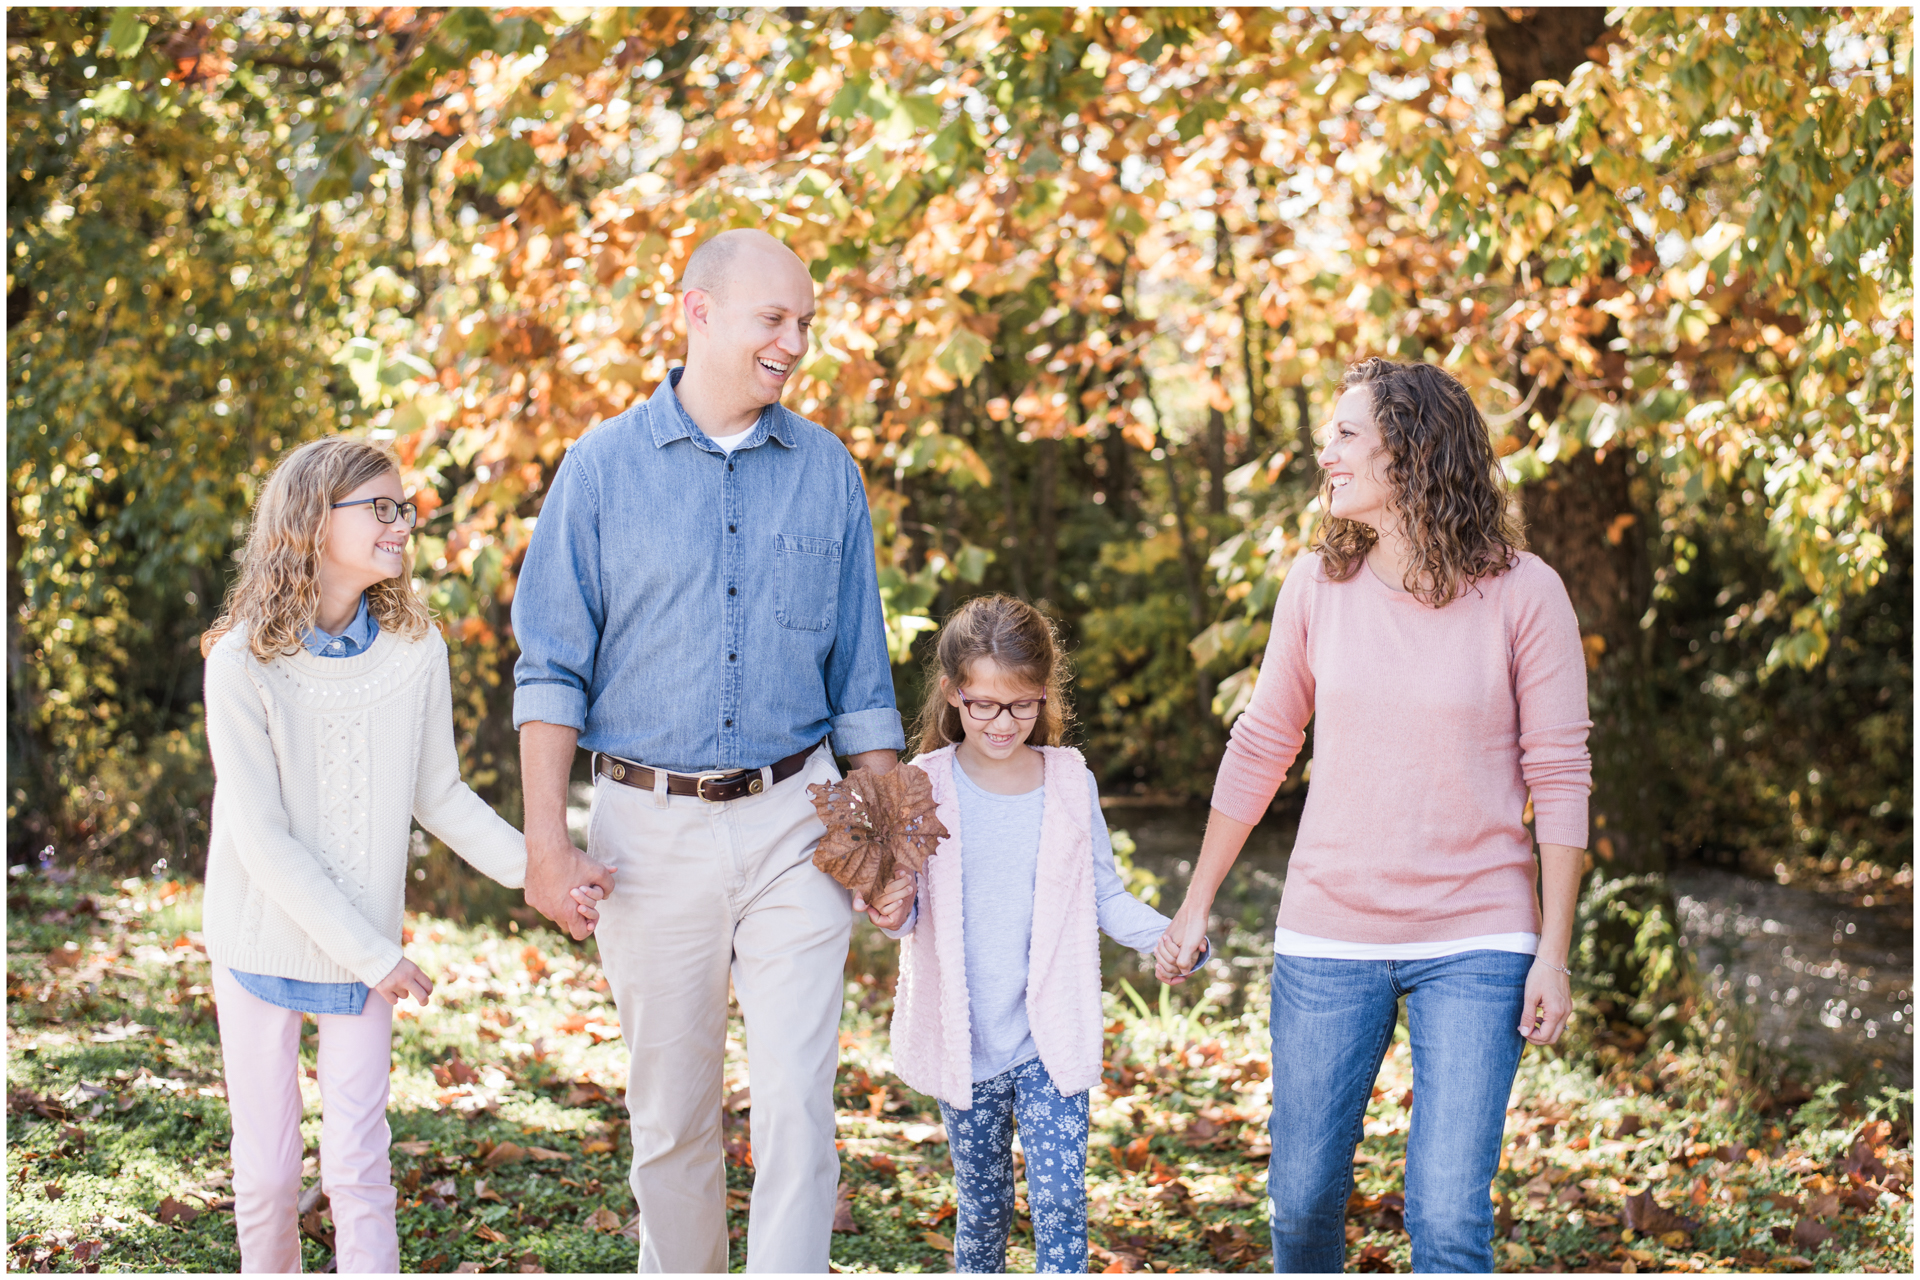 Athens Alabama Family Photographer - Fall Family Session - Swan Creek Greenway